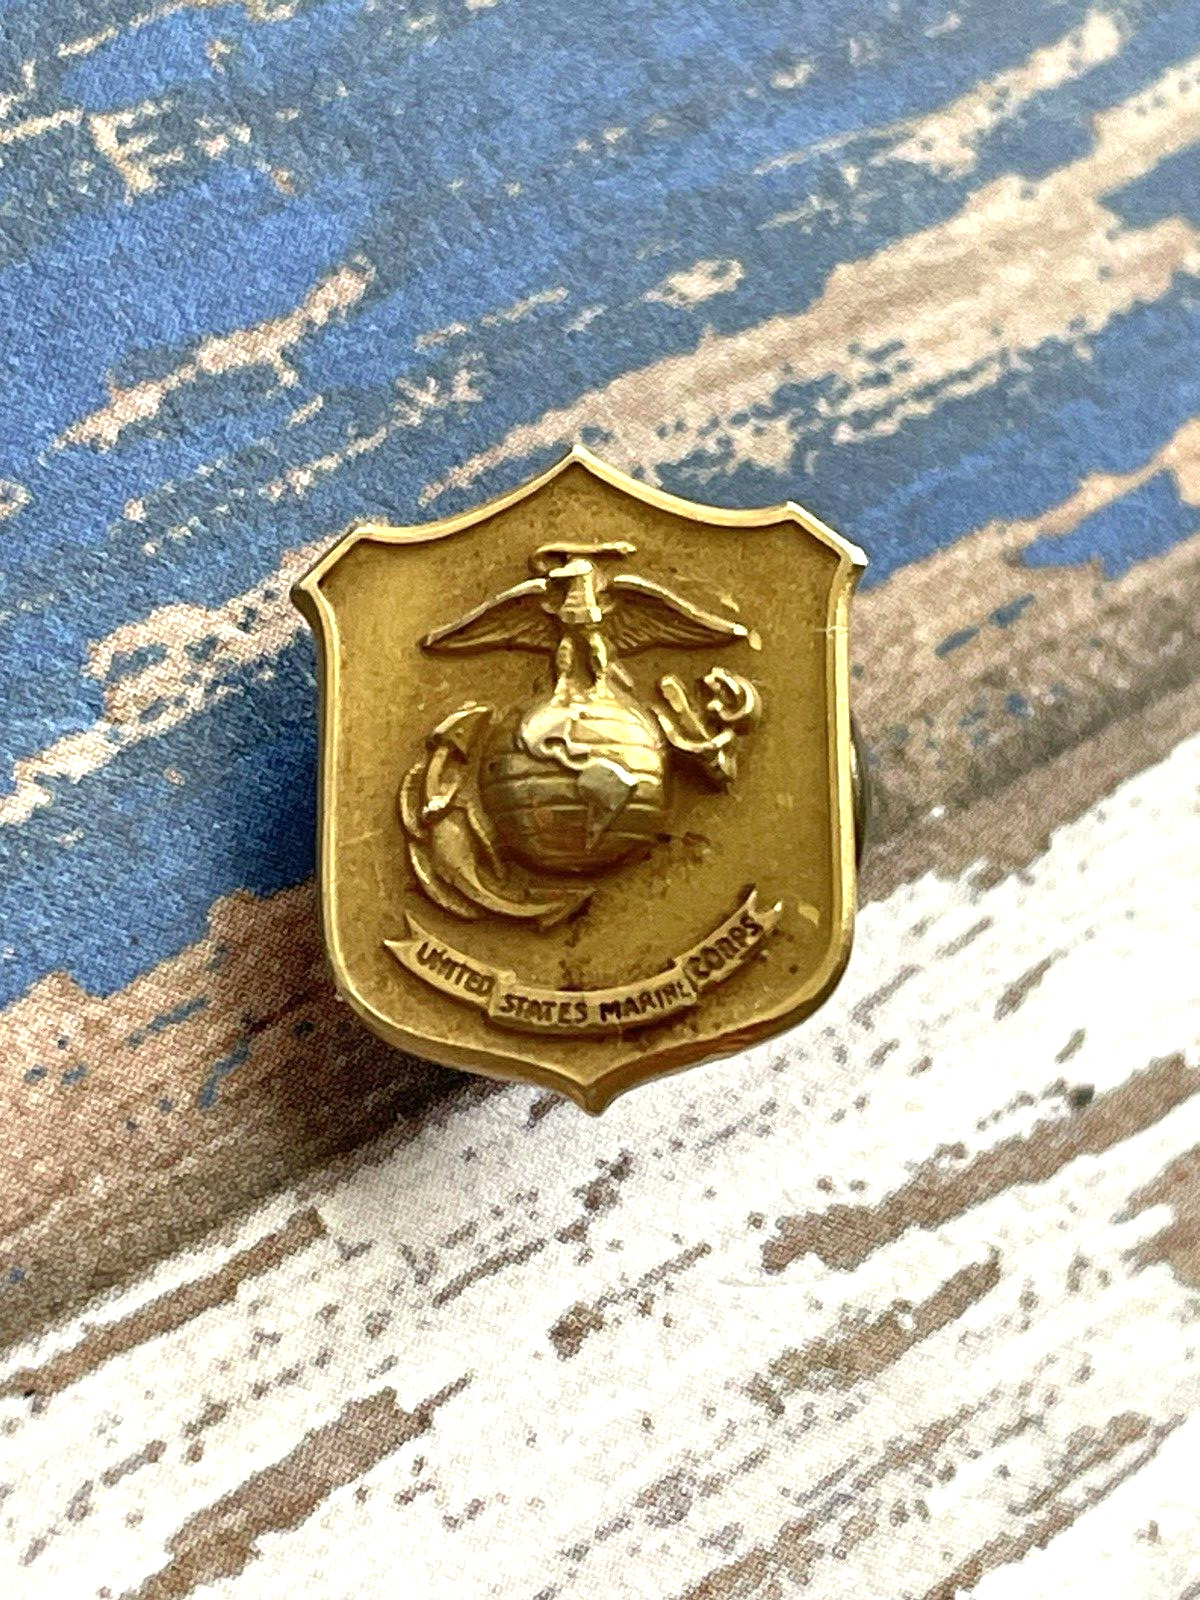 Vintage 10k Solid Gold U.S. Marine Corps Service Lapel or Tie Pin Sweetheart EGA